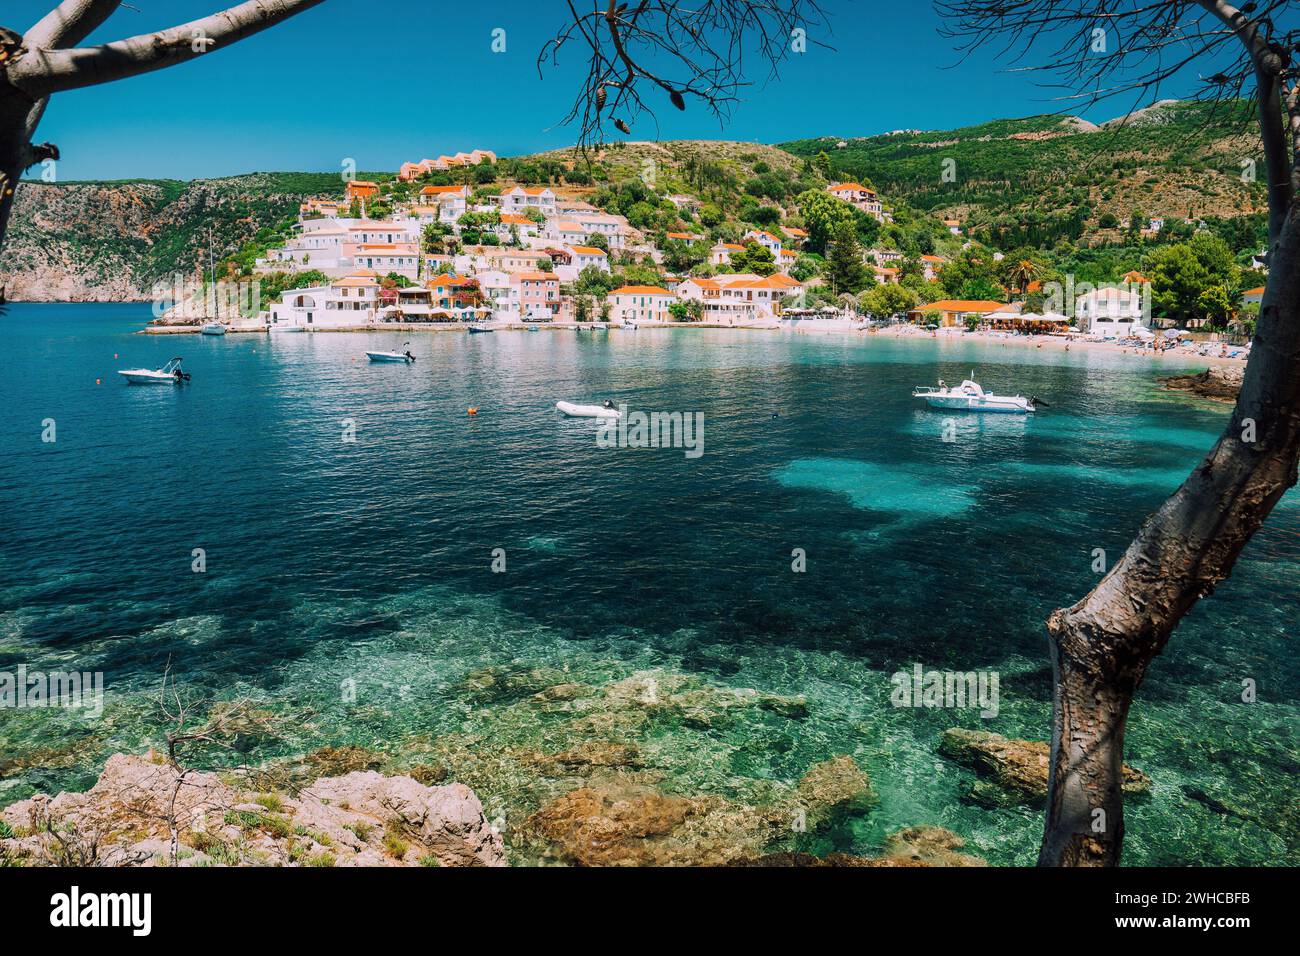 Assos village, Kefalonia Greece. View on turquoise transparent bay lagoon of Mediterranean sea. Surrounded by green pine trees. Blue deep pattern on bottom. Stock Photo